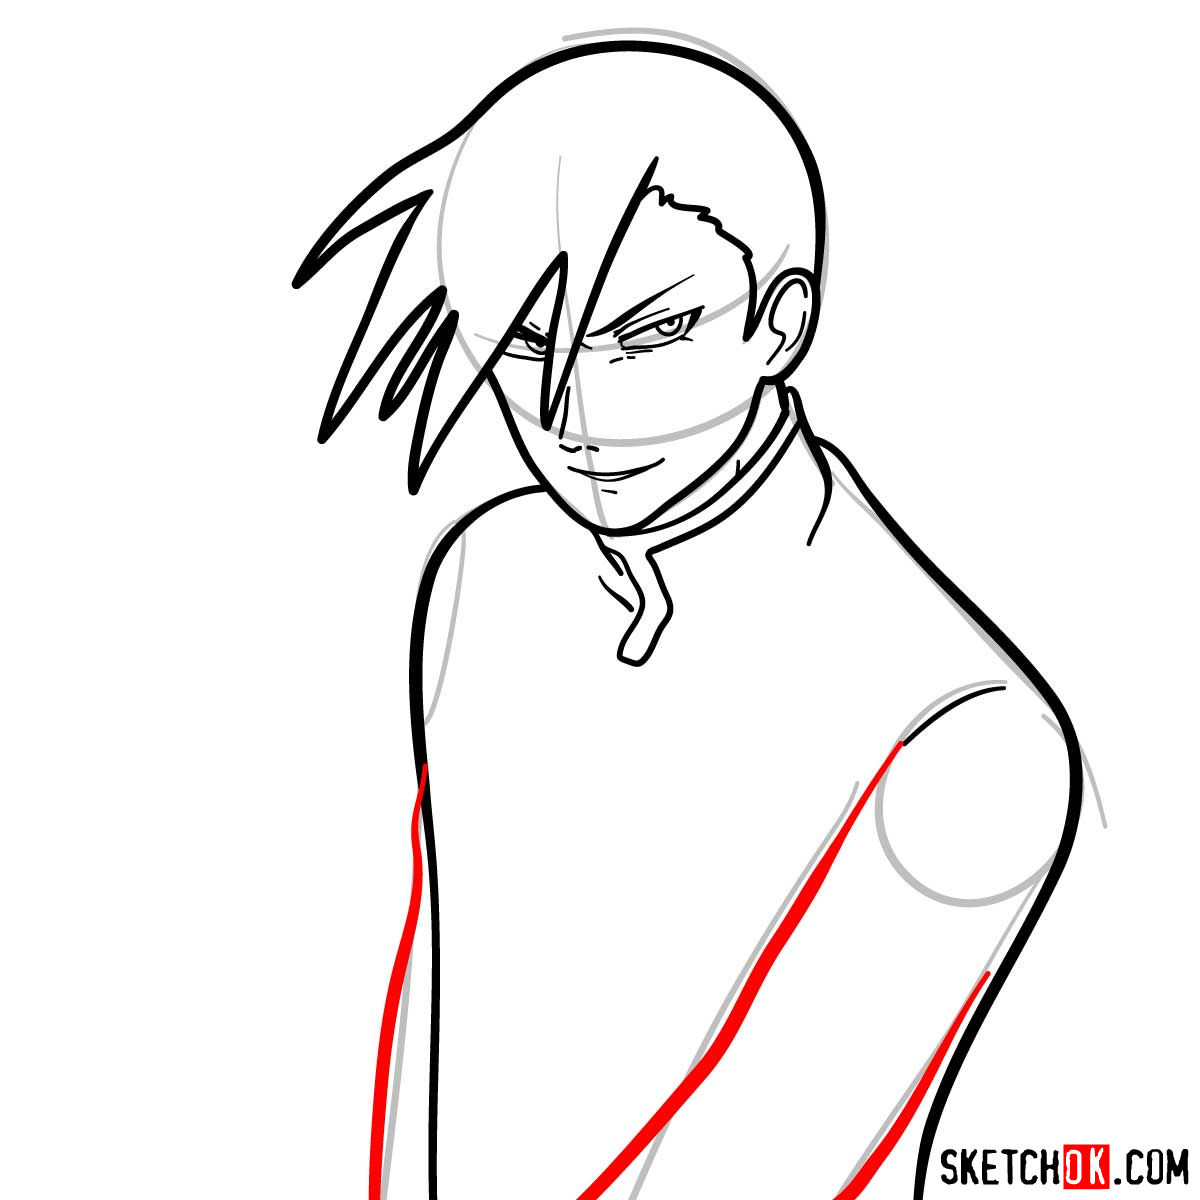 How to draw Greed from Fullmetal Alchemist anime - step 09